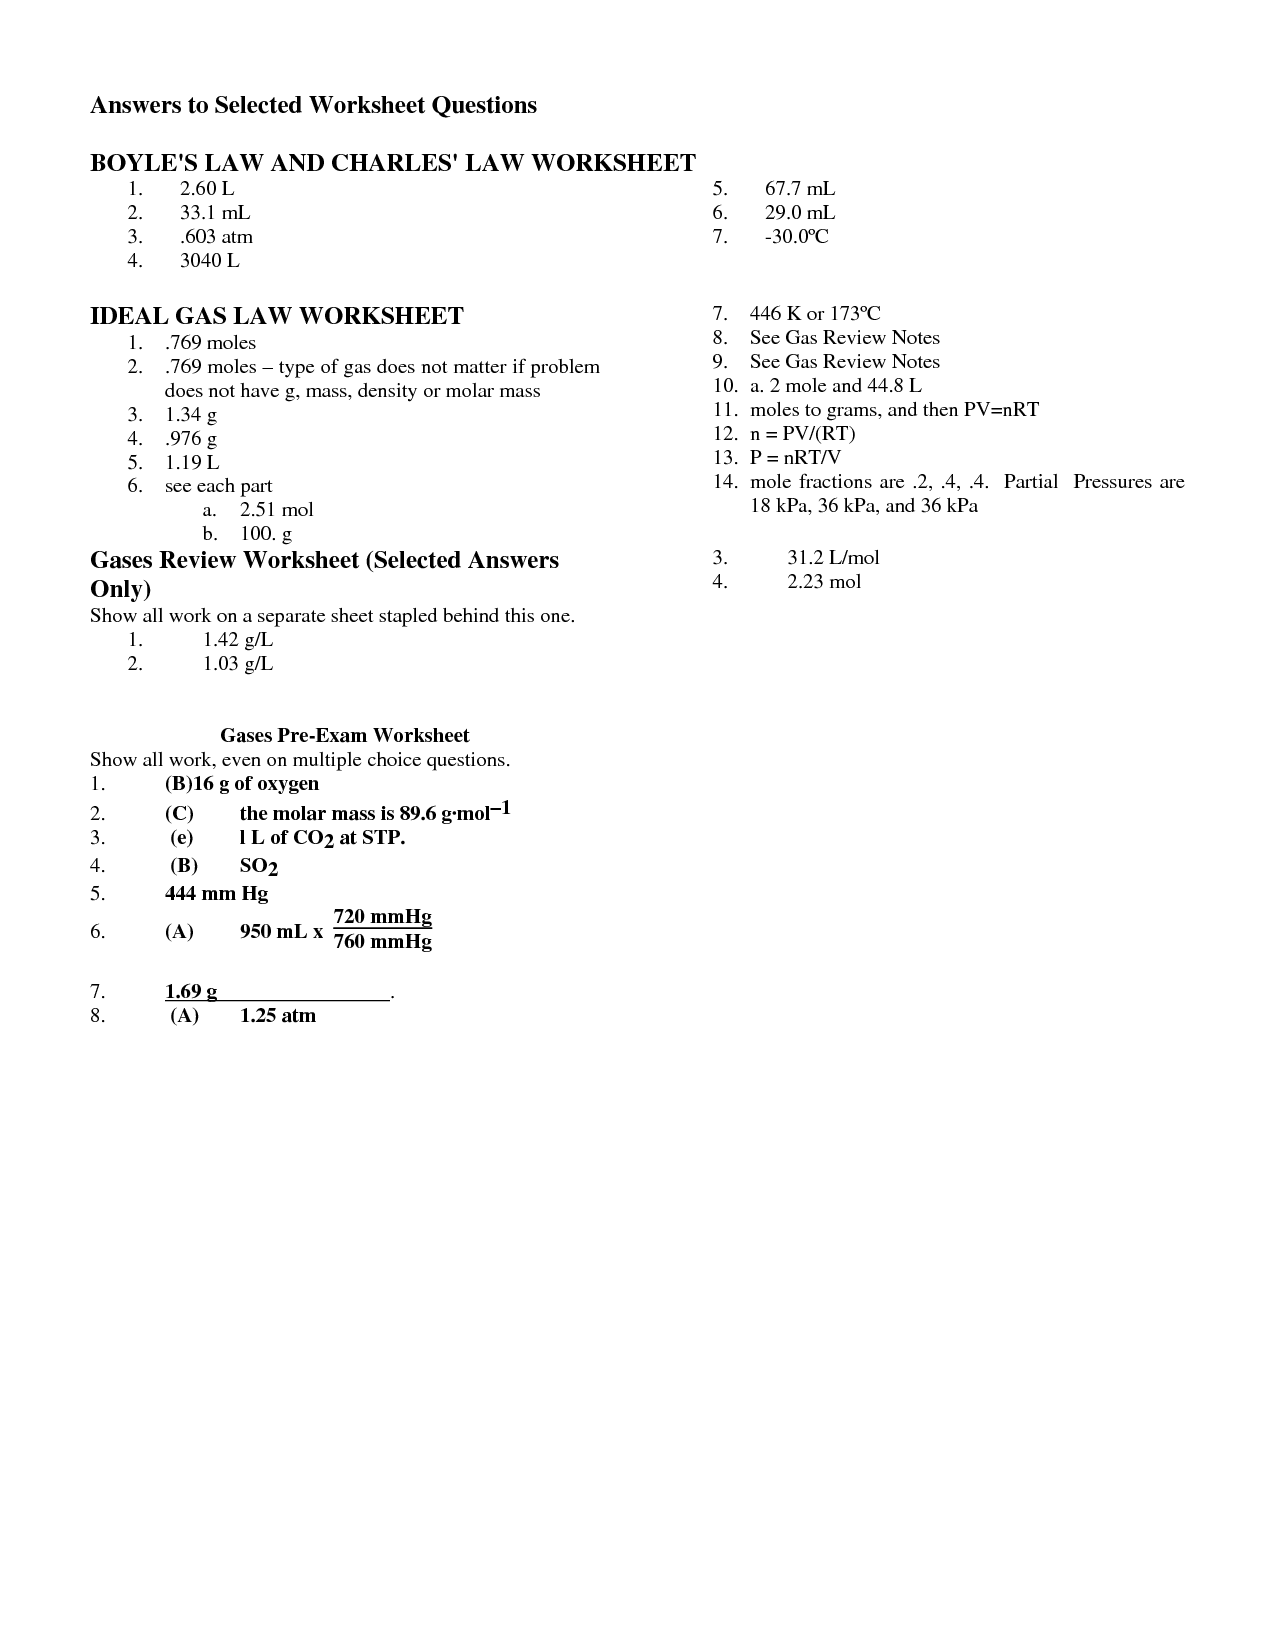 Charles and Boyles Law Worksheet Answers